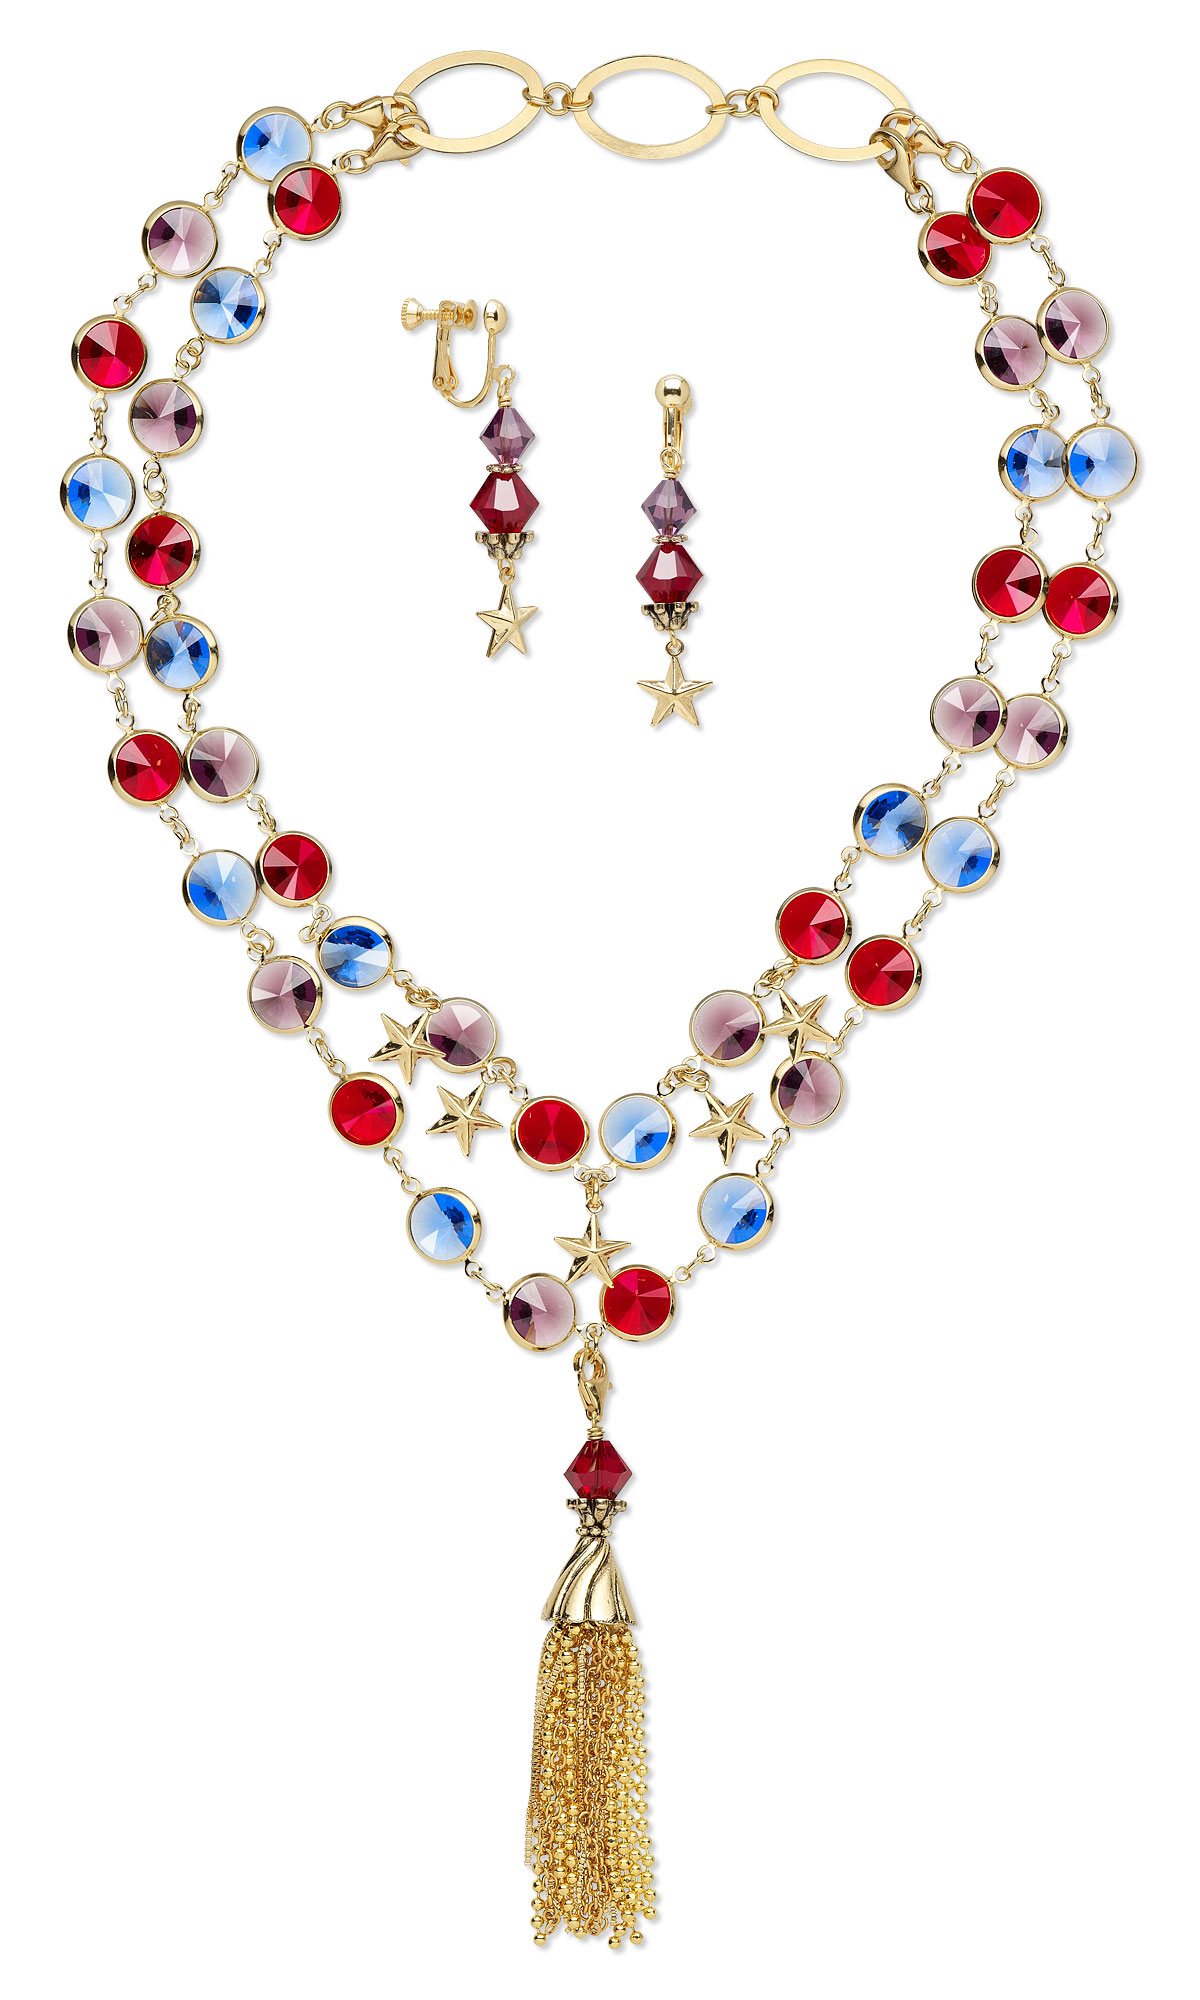 Jewelry Design - Double-Strand Necklace and Earring Set with Swarovski ...